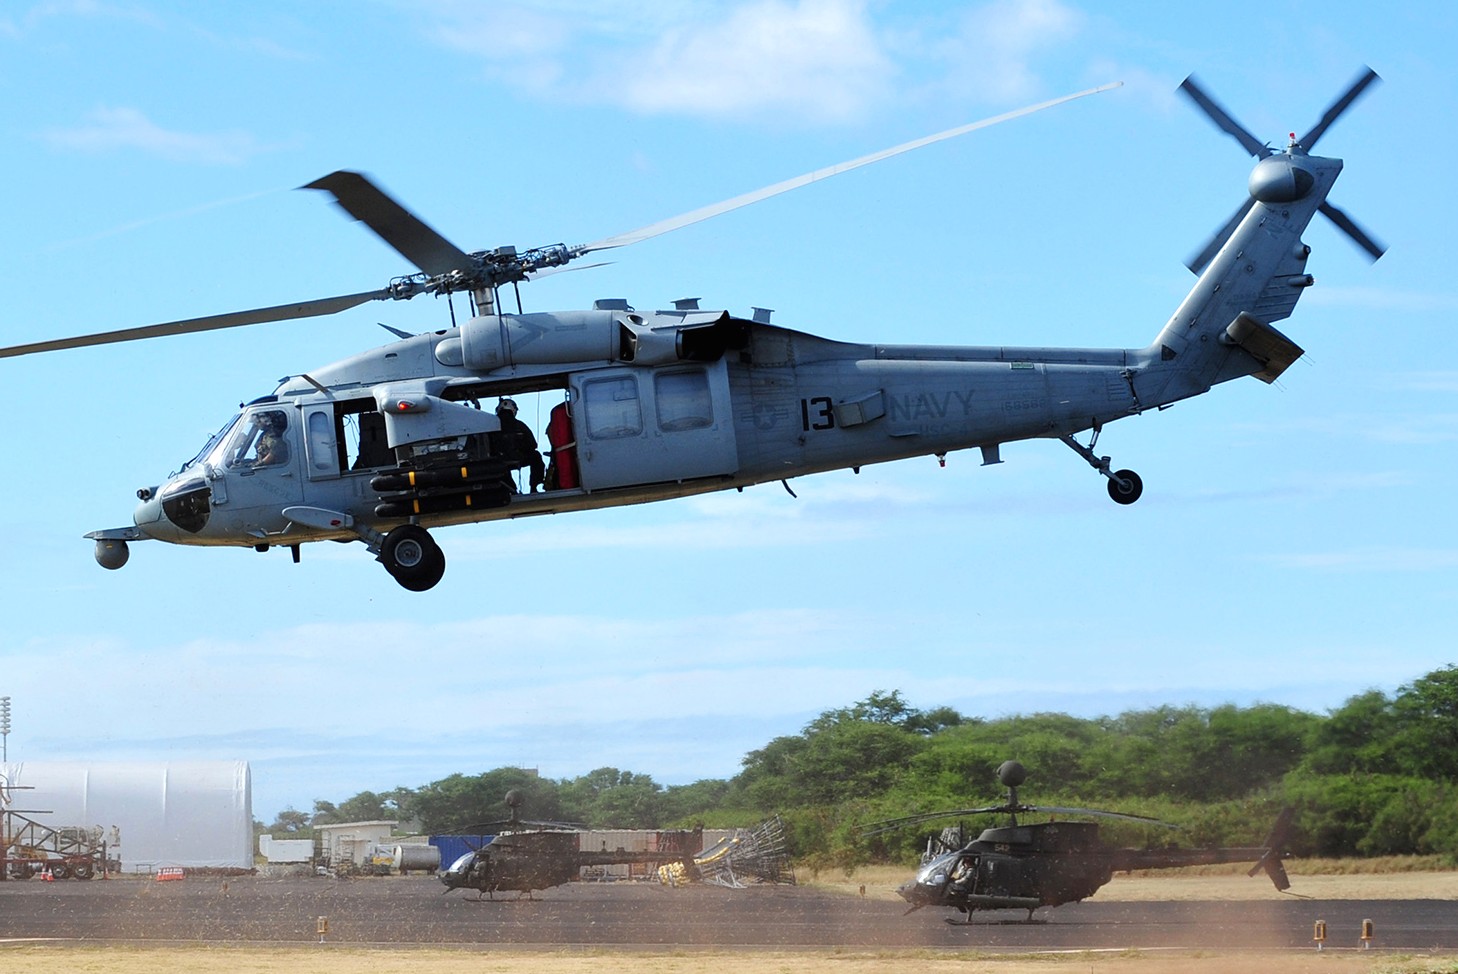 hsc-4 black knights helicopter sea combat squadron us navy mh-60s seahawk 2014 37 exercise rimpac 14 agm-114 hellfire missile